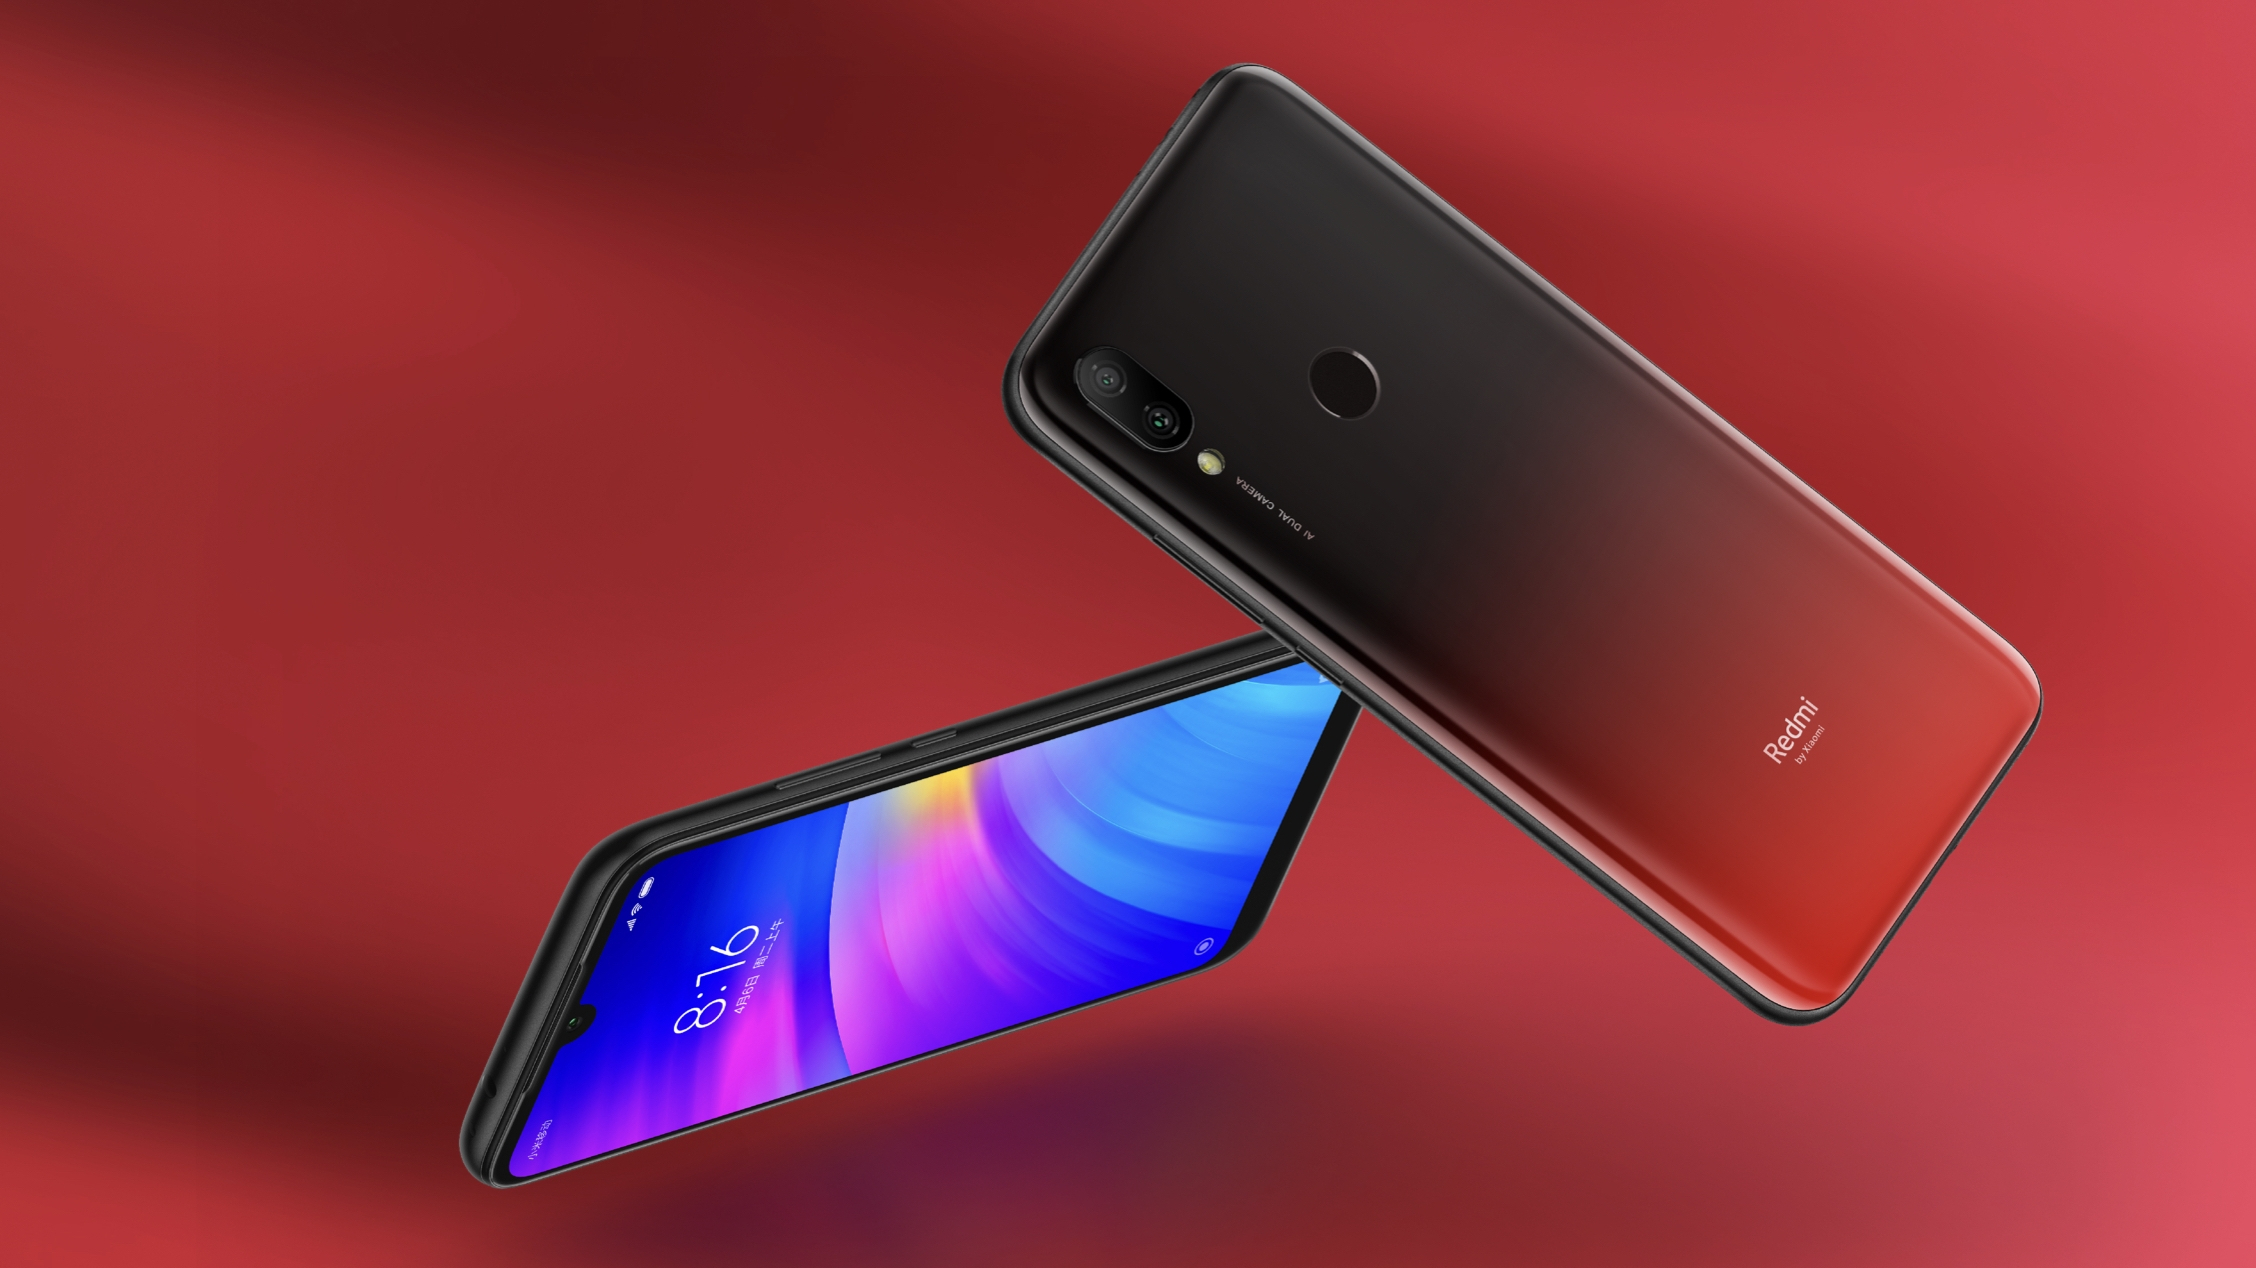 Render of the Xiaomi Redmi 7 in red color.